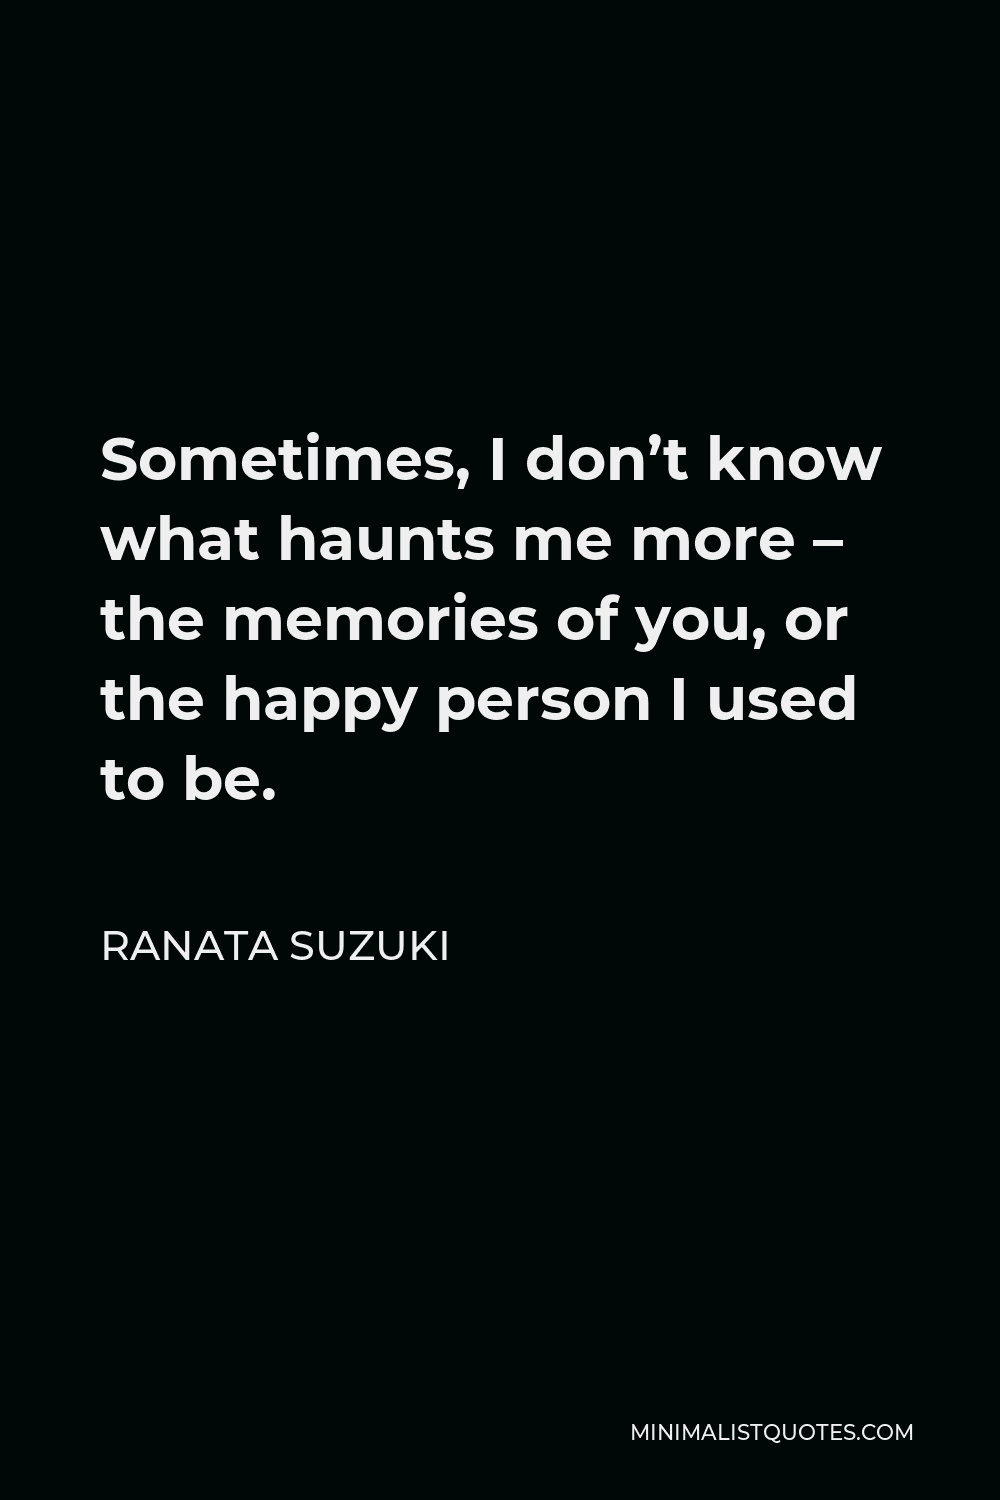 Ranata Suzuki Quote - Sometimes, I don’t know what haunts me more – the memories of you, or the happy person I used to be.